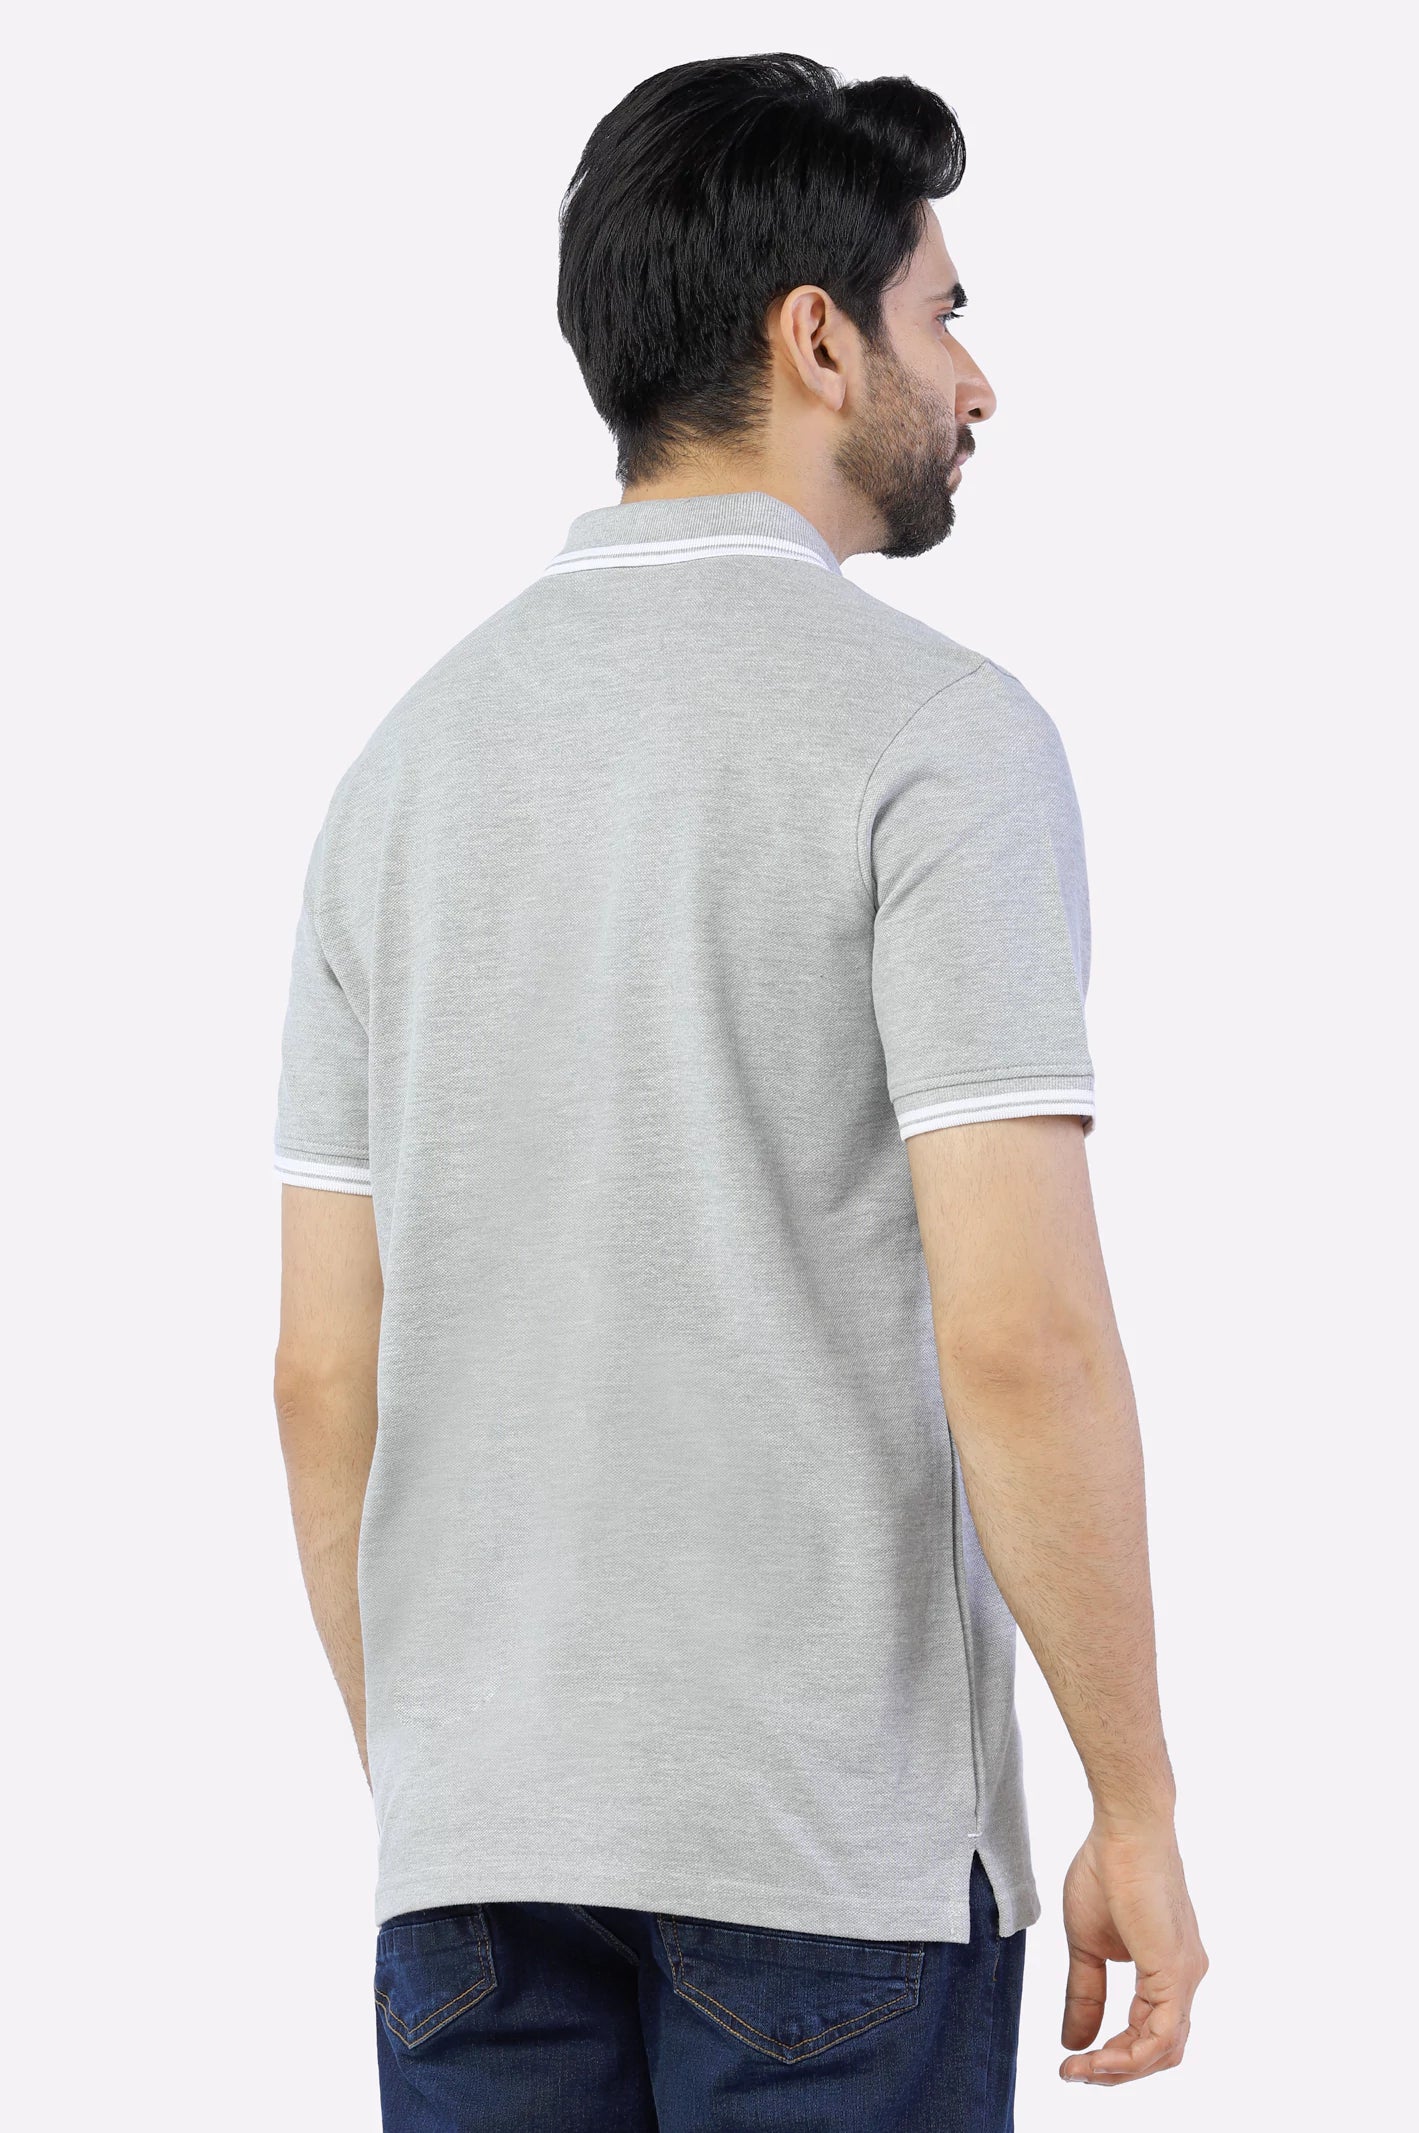 Heather Grey Jacquard Collar Polo From Diners